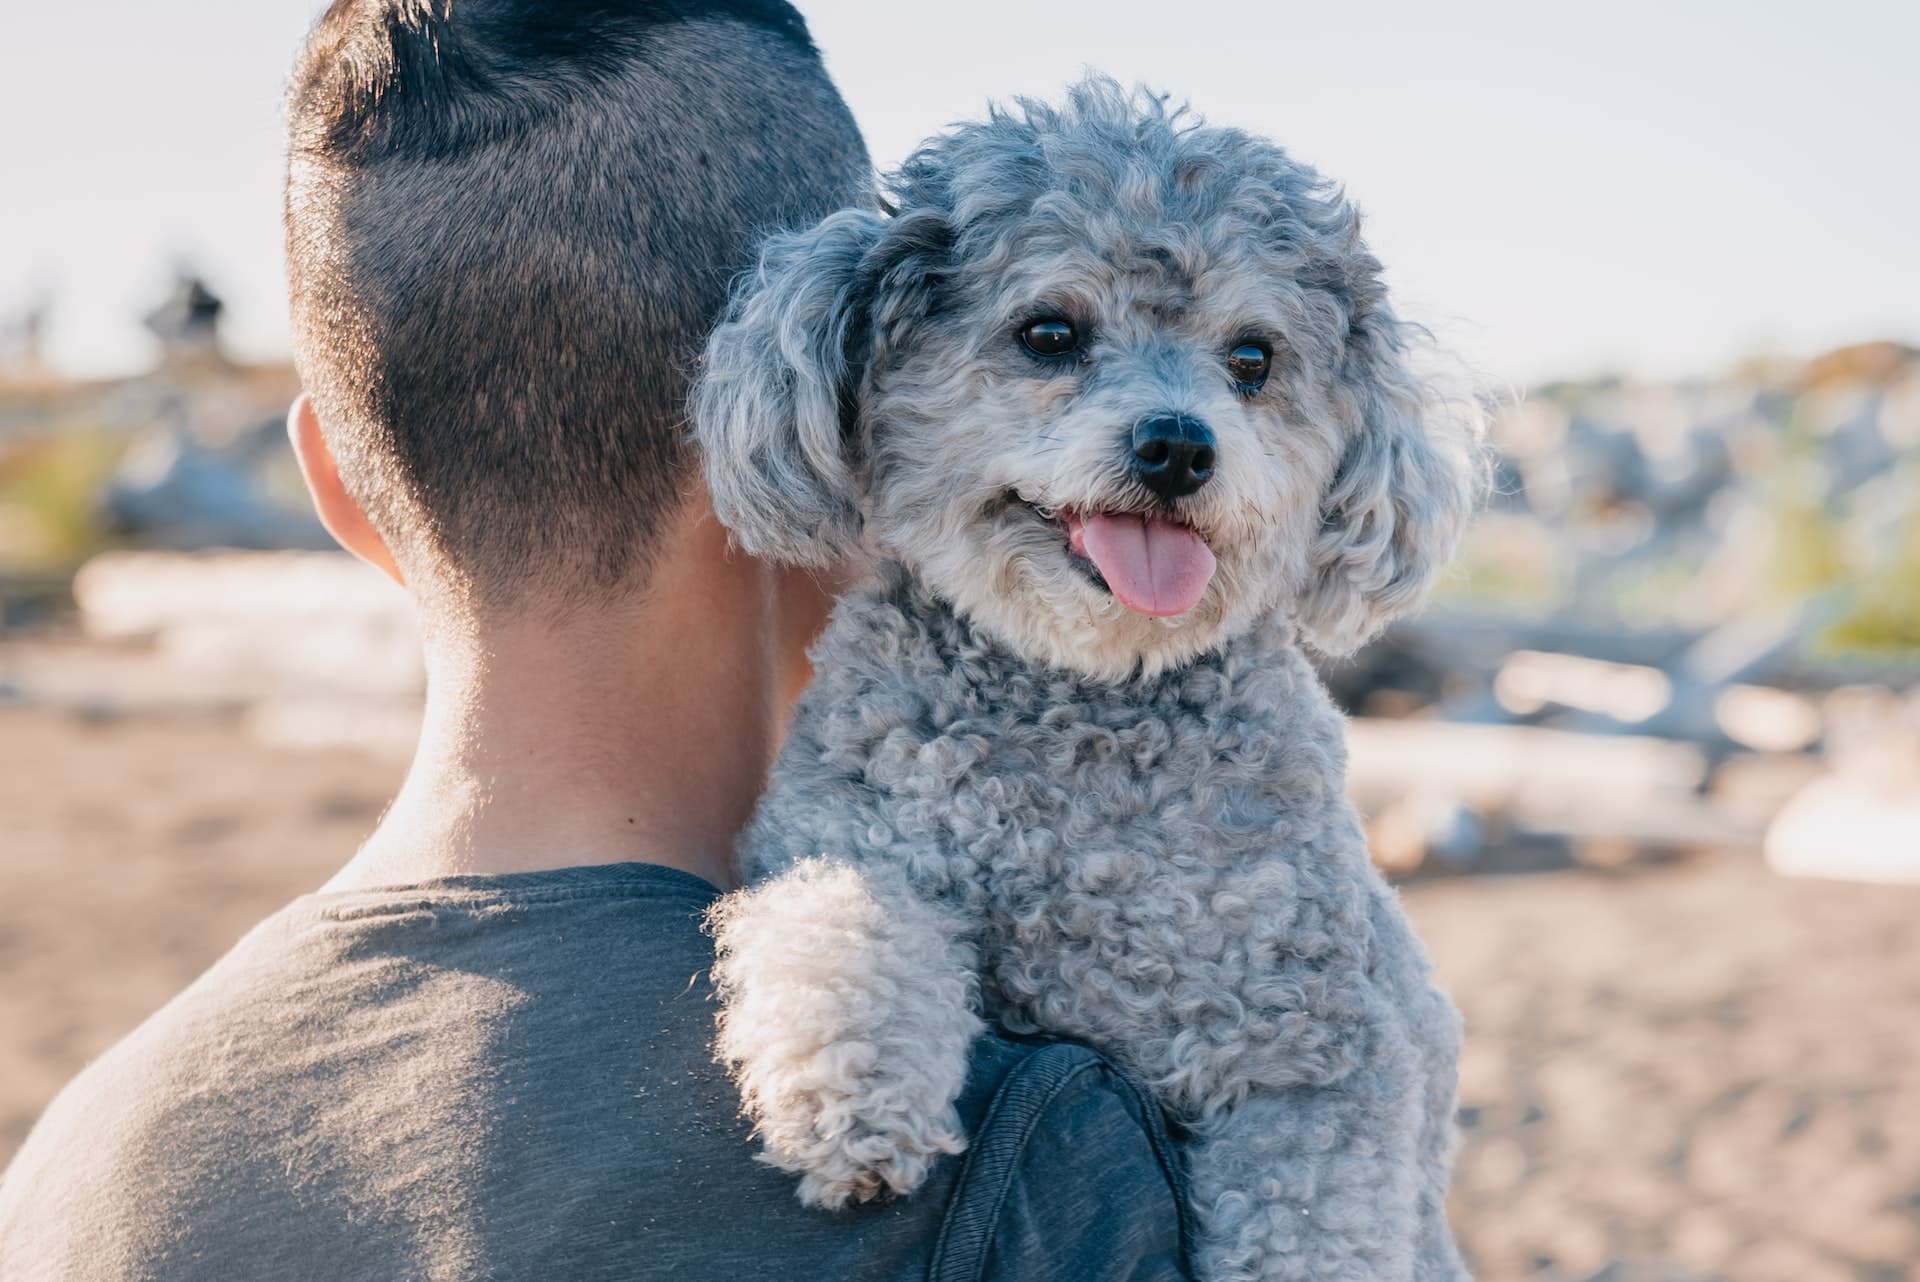 A major part of the dog adoption checklist is understanding that you’ll need to invest in your dog’s health (both mental and physical) and their training and education over their lifetime.